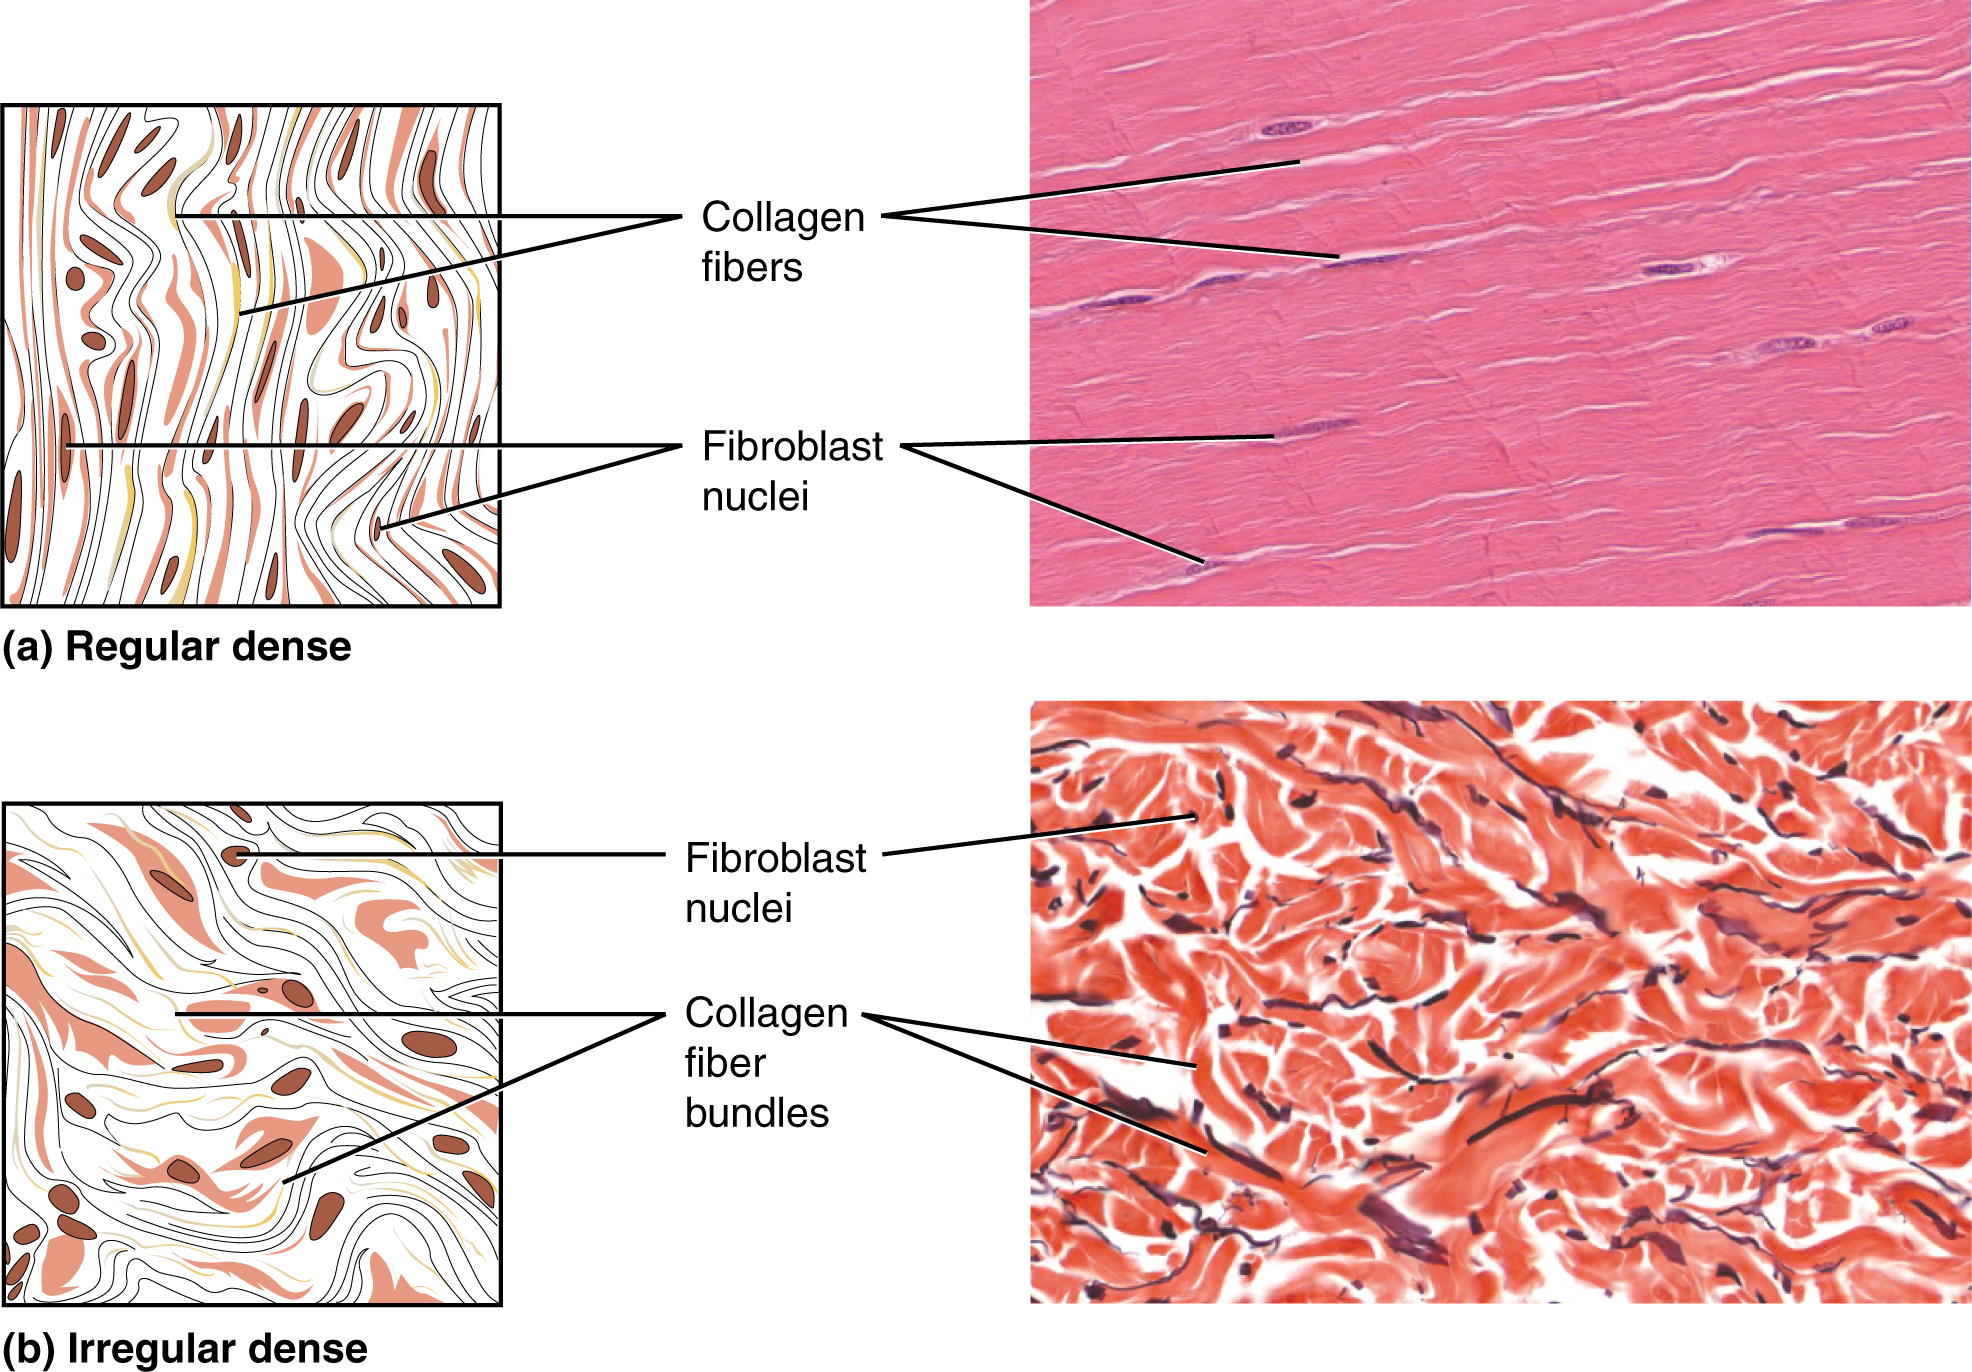 Part A shows a diagram of regular dense connective tissue alongside a micrograph. The tissue is composed of parallel, thread-like collagen fibers running vertically through the diagram. Between the vertical fibers, several dark, oval shaped fibroblast nuclei are visible. In the micrograph, the whitish collagen strands run horizontally. Several dark purple fibroblast nuclei are embedded in the lightly stained matrix. Part B shows a diagram of irregular dense connective tissue on the left and a micrograph on the right. In the diagram, the collagen fibers are arranged in bundles that curve and loop throughout the tissue. The fibers within a bundle run parallel to each other, but separate bundles crisscross throughout the tissue. Because of this, the irregular dense connective tissue appears less organized than the regular dense connective tissue. This is also evident in the micrograph, where the white collagen bundles radiate throughout the micrograph in all directions. The fibroblasts are visible as red stained cells with dark purple nuclei.